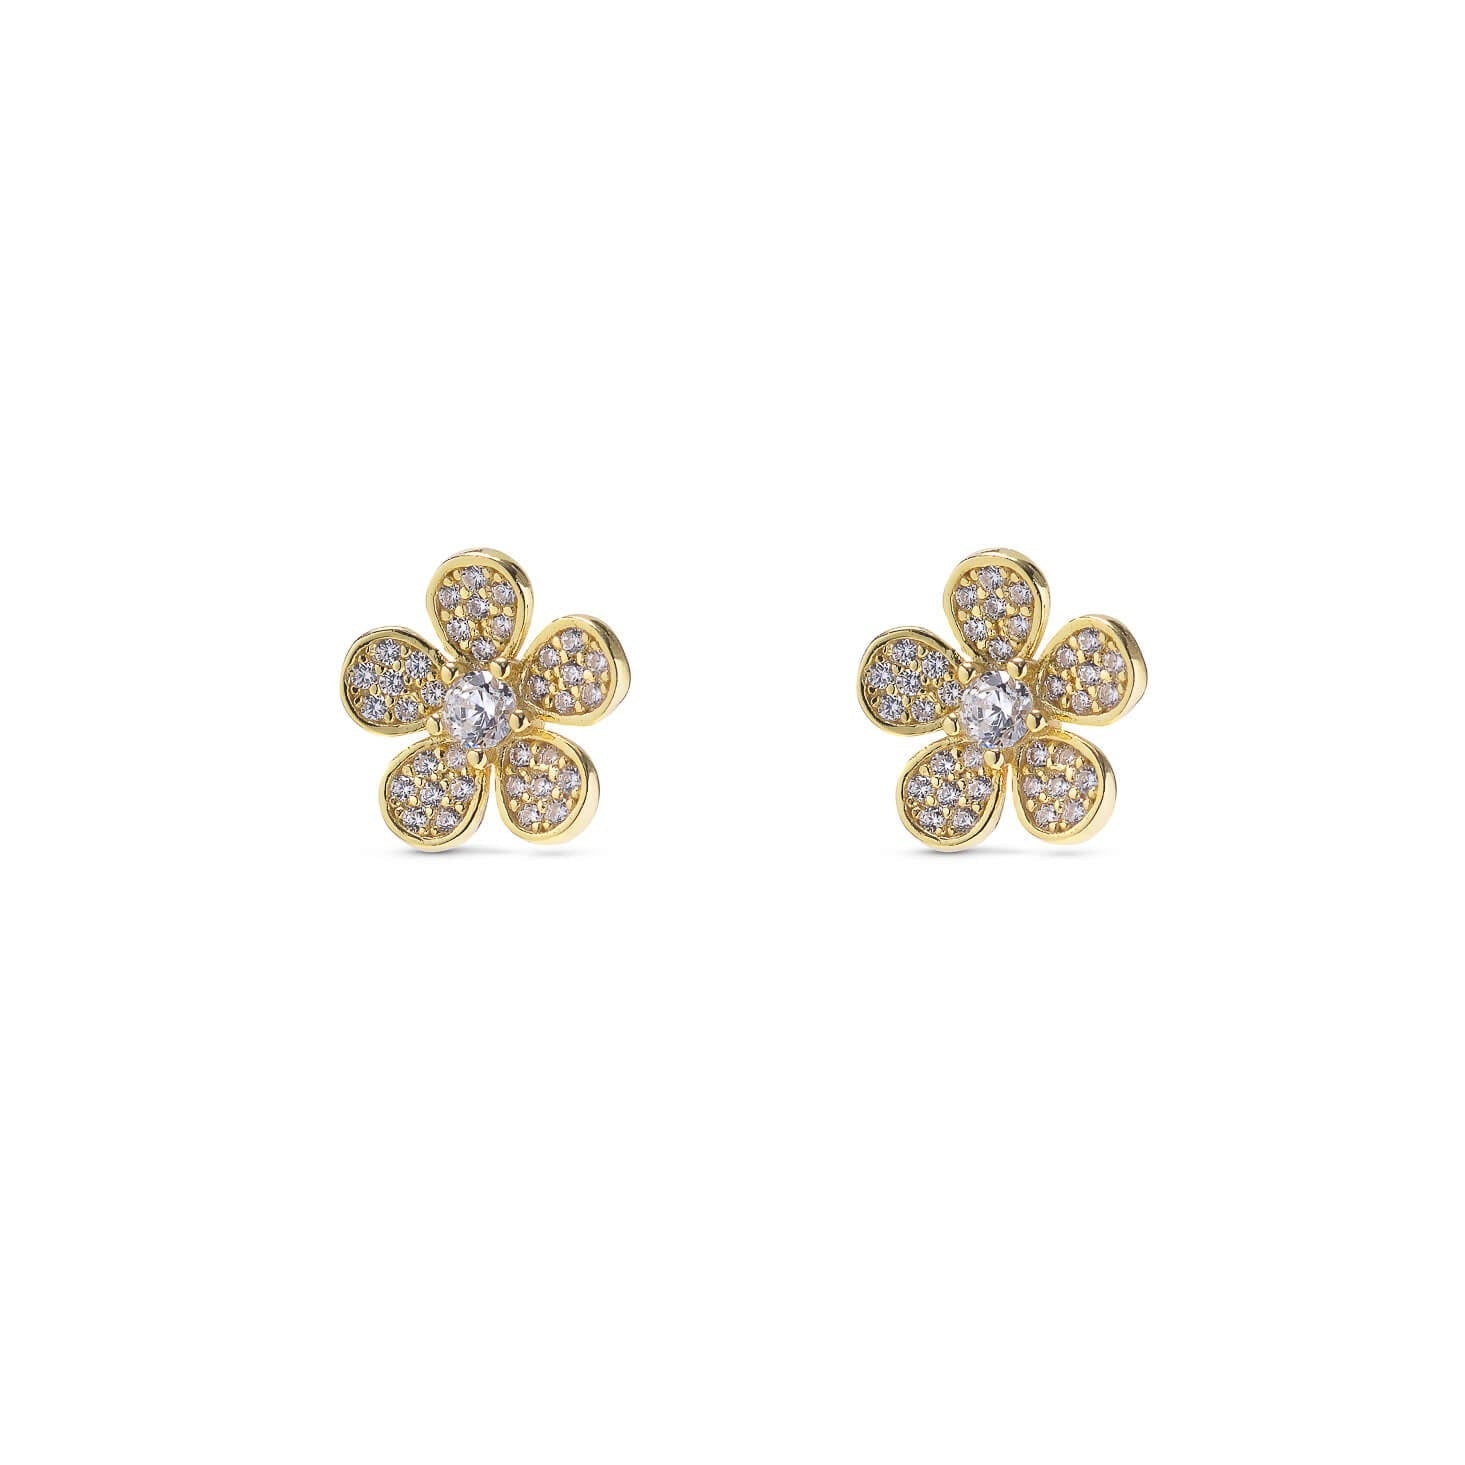 Daisy Gold Stud Earrings with Cubic Zirconia